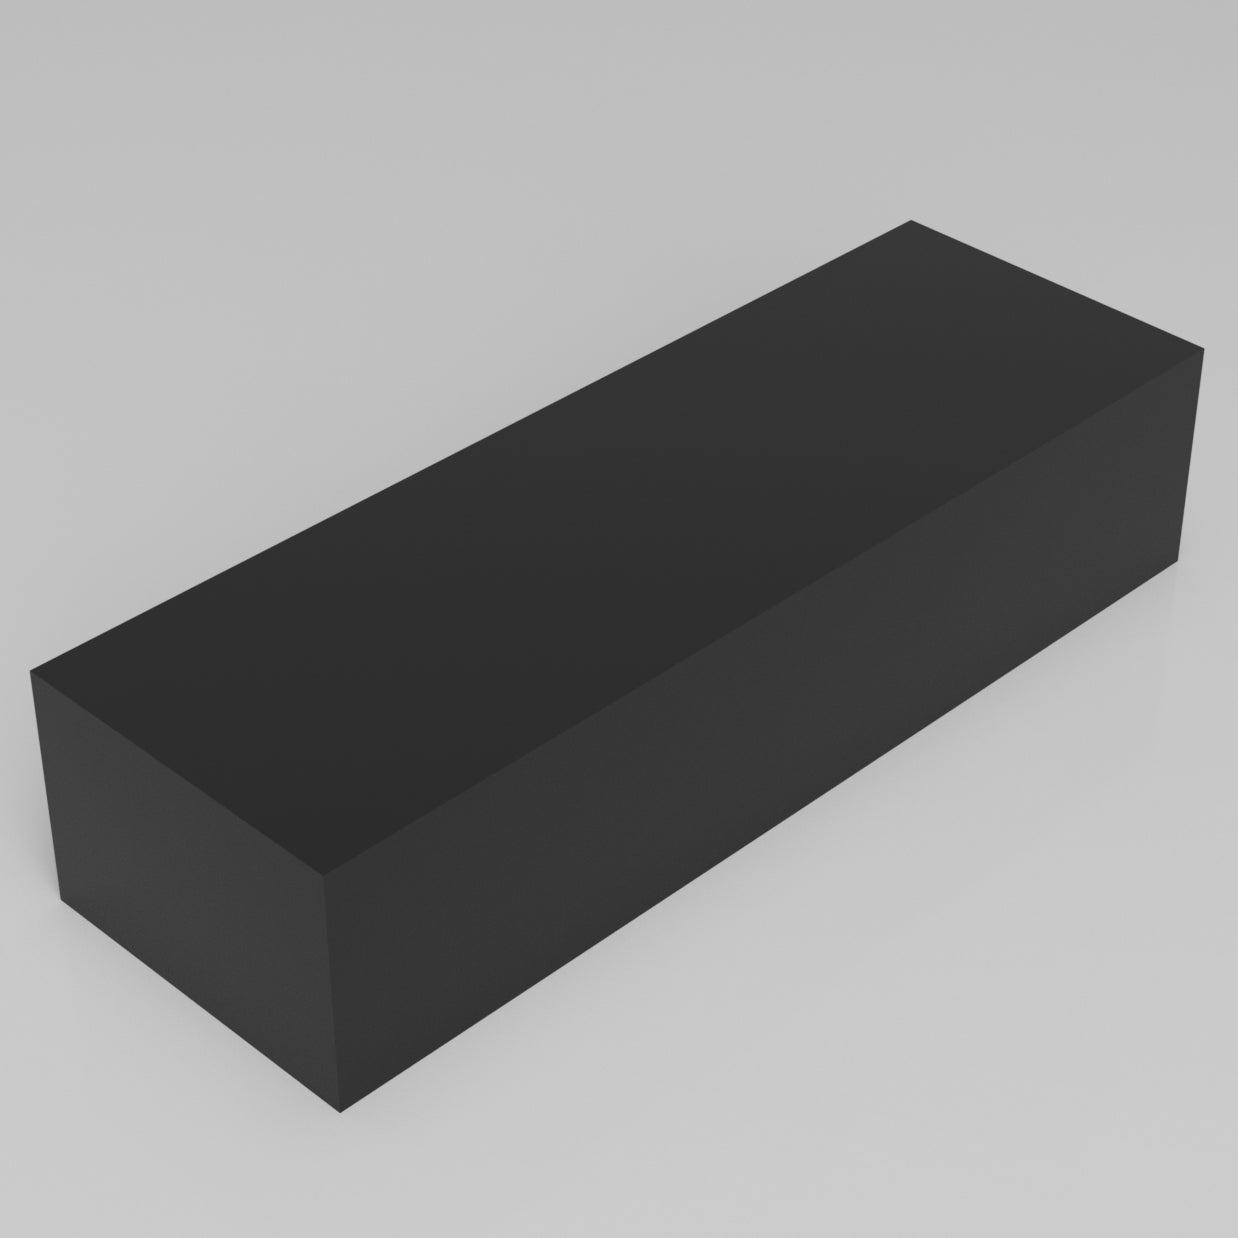 Machinable Wax Rectangular Block Front View 4 Inch by 6 Inch by 18 Inch